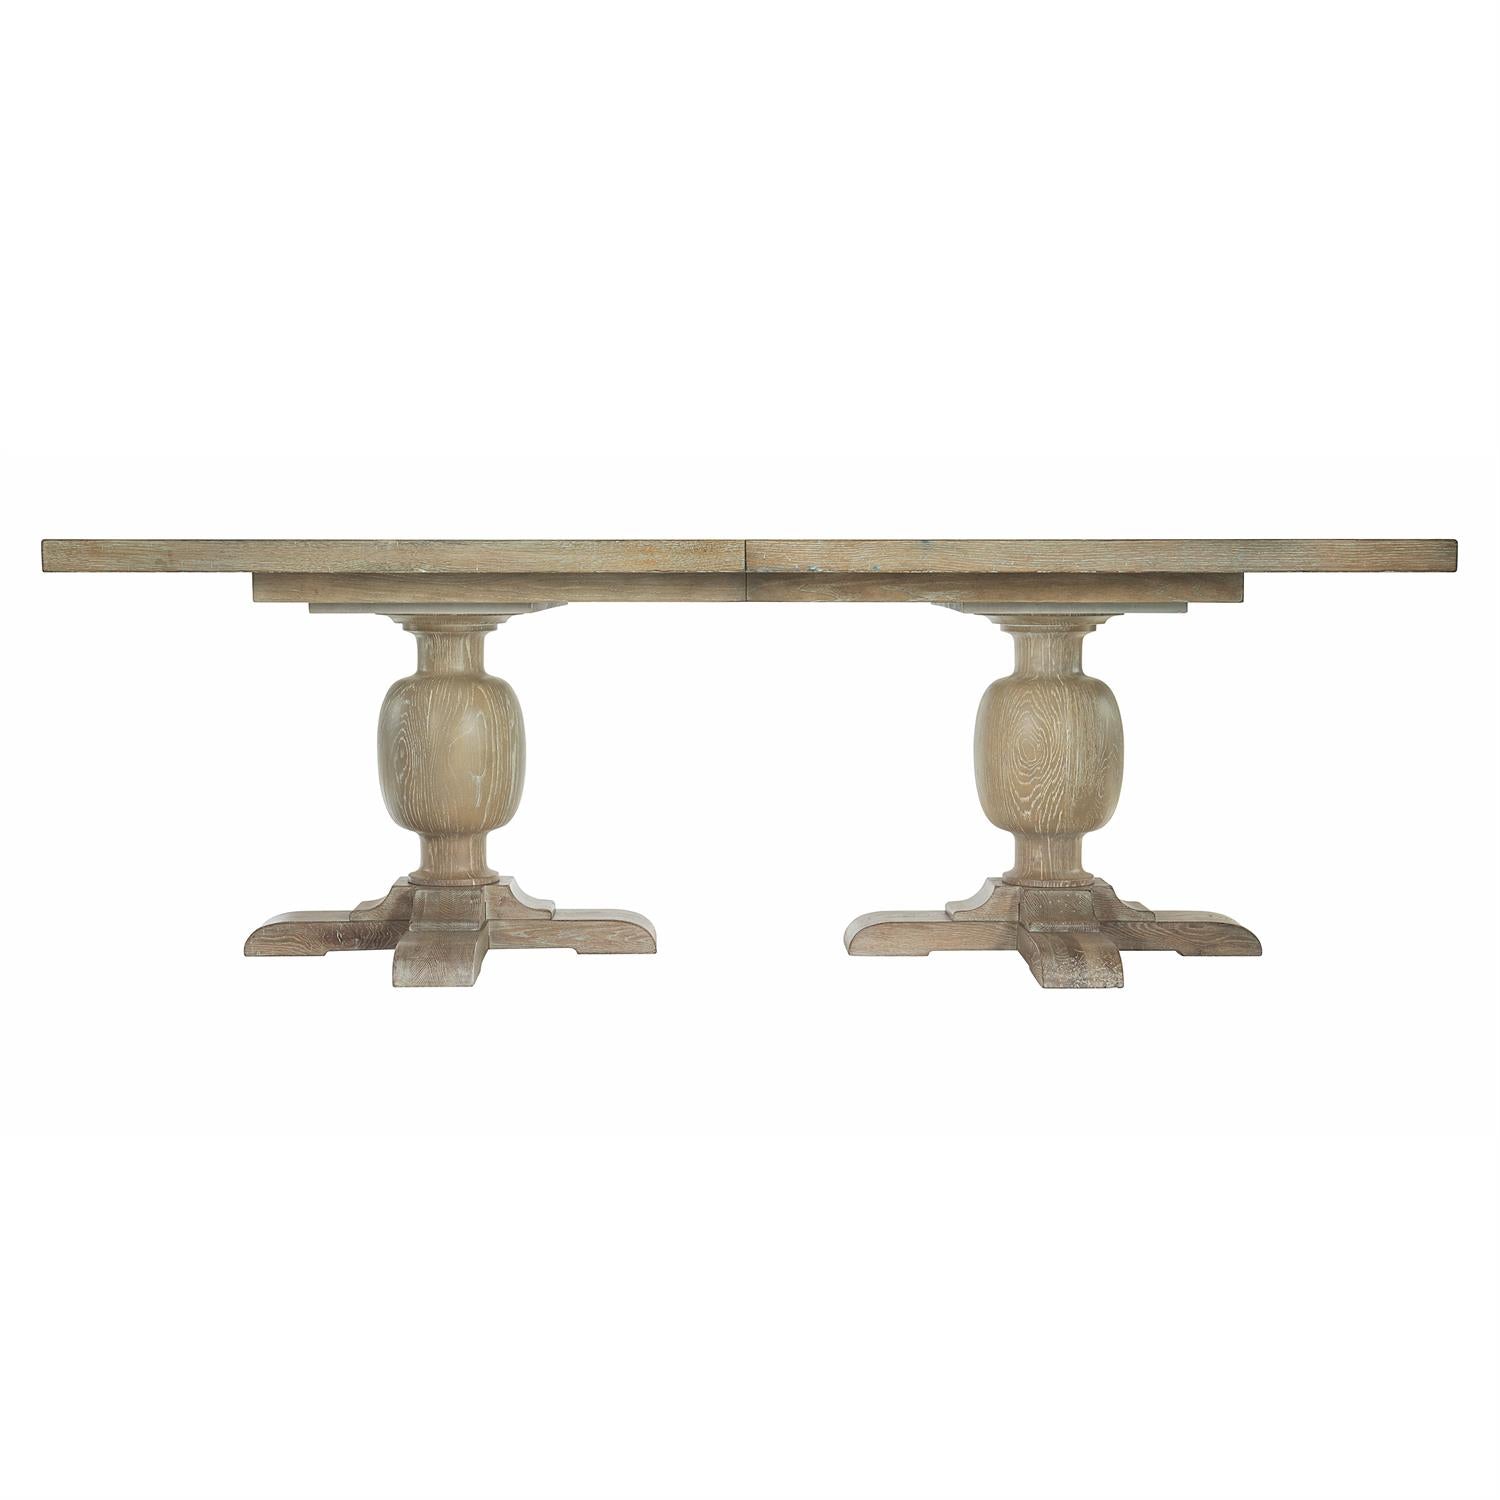 Light House Co., Rustic Patina Dining Table